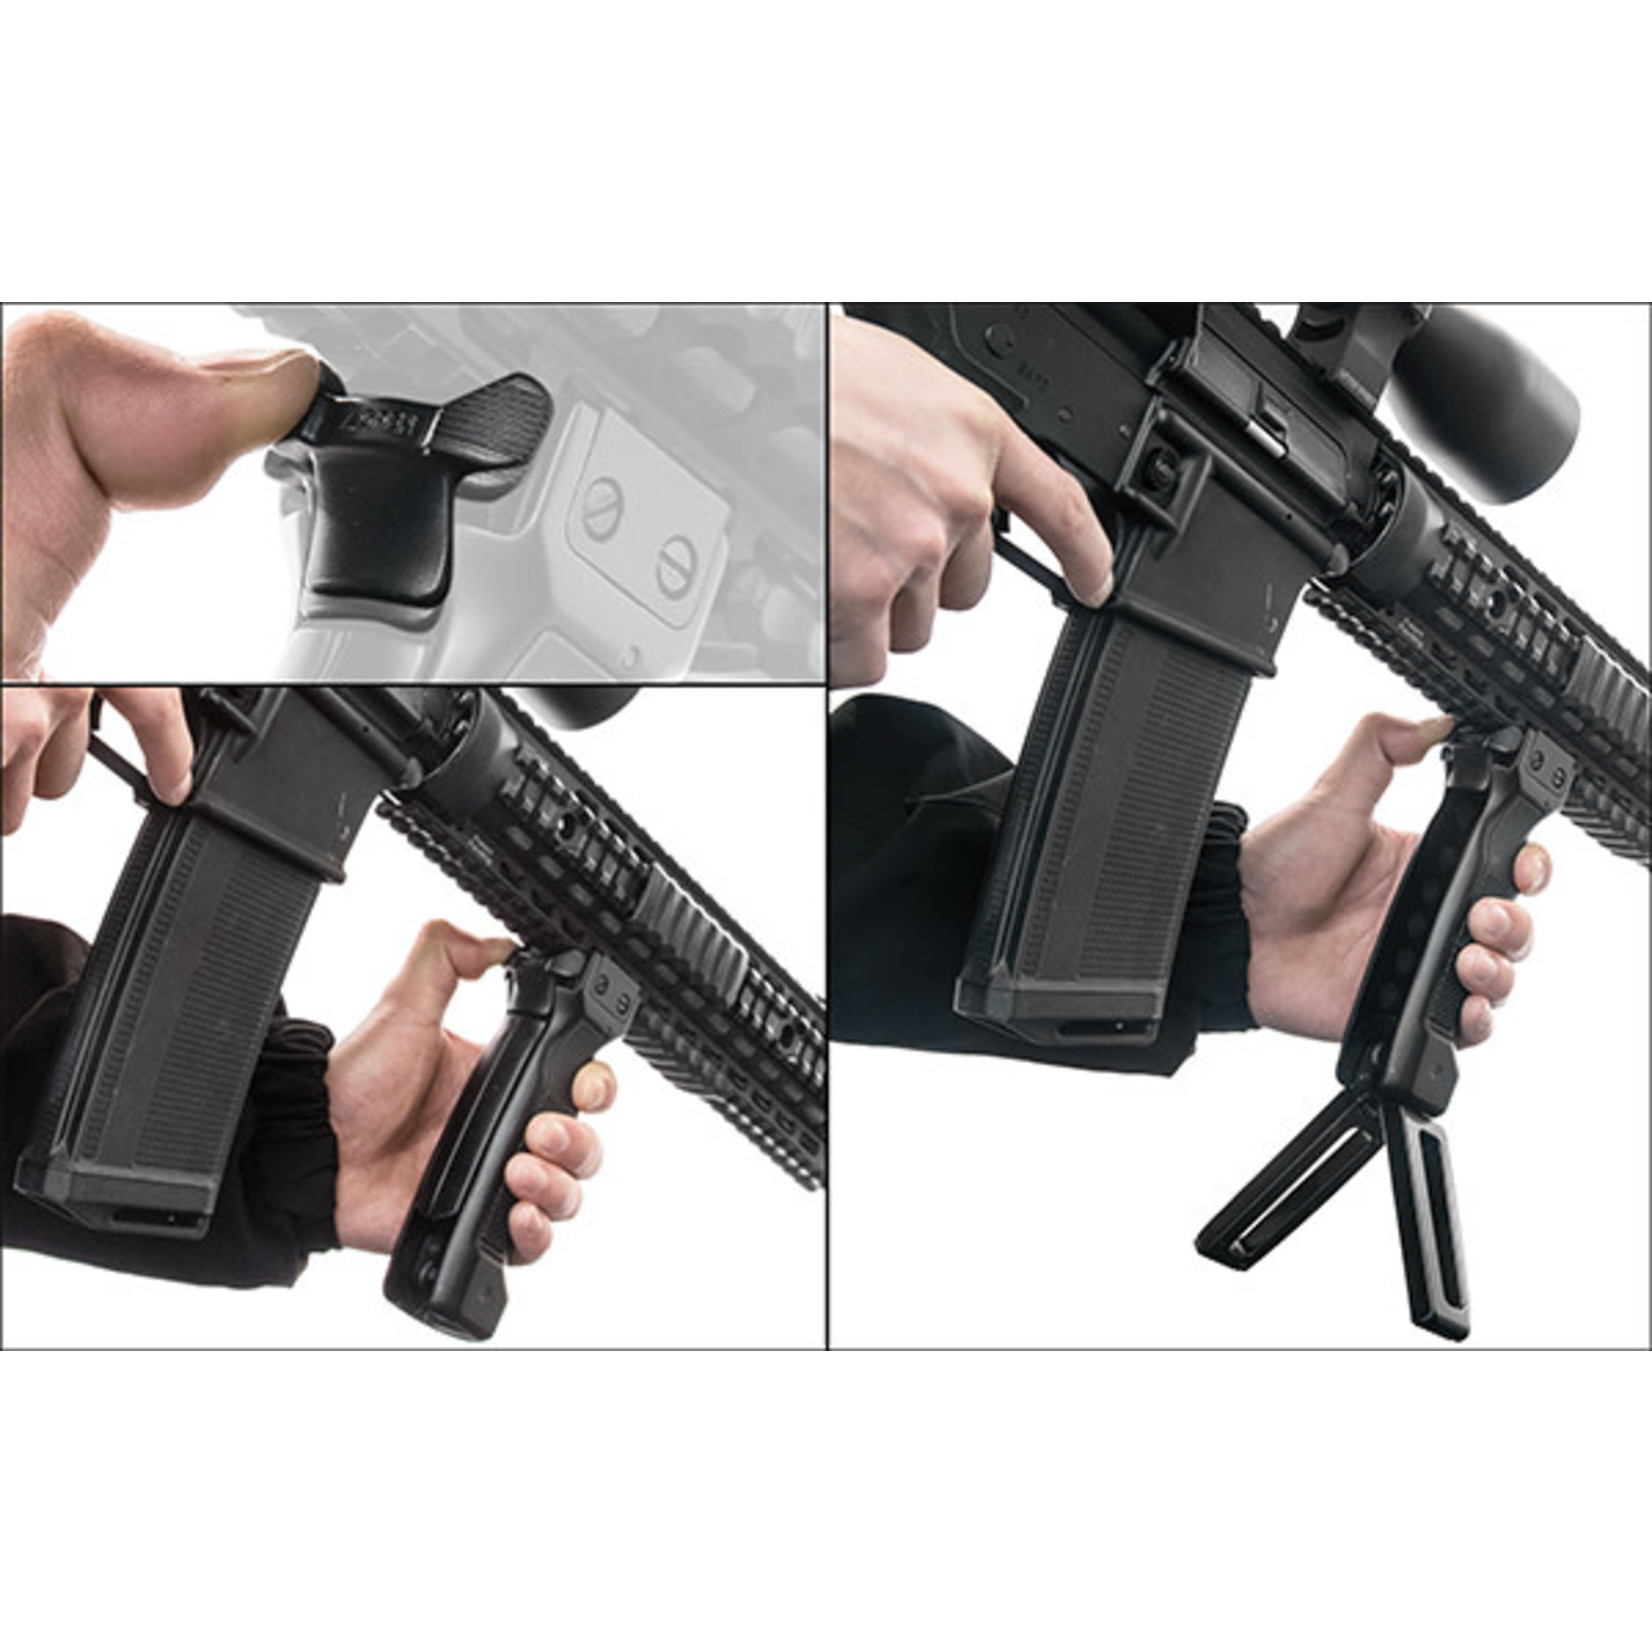 UTG COMBAT D GRIP QUICK DEPLOYABLE BIPOD FOREGRIP